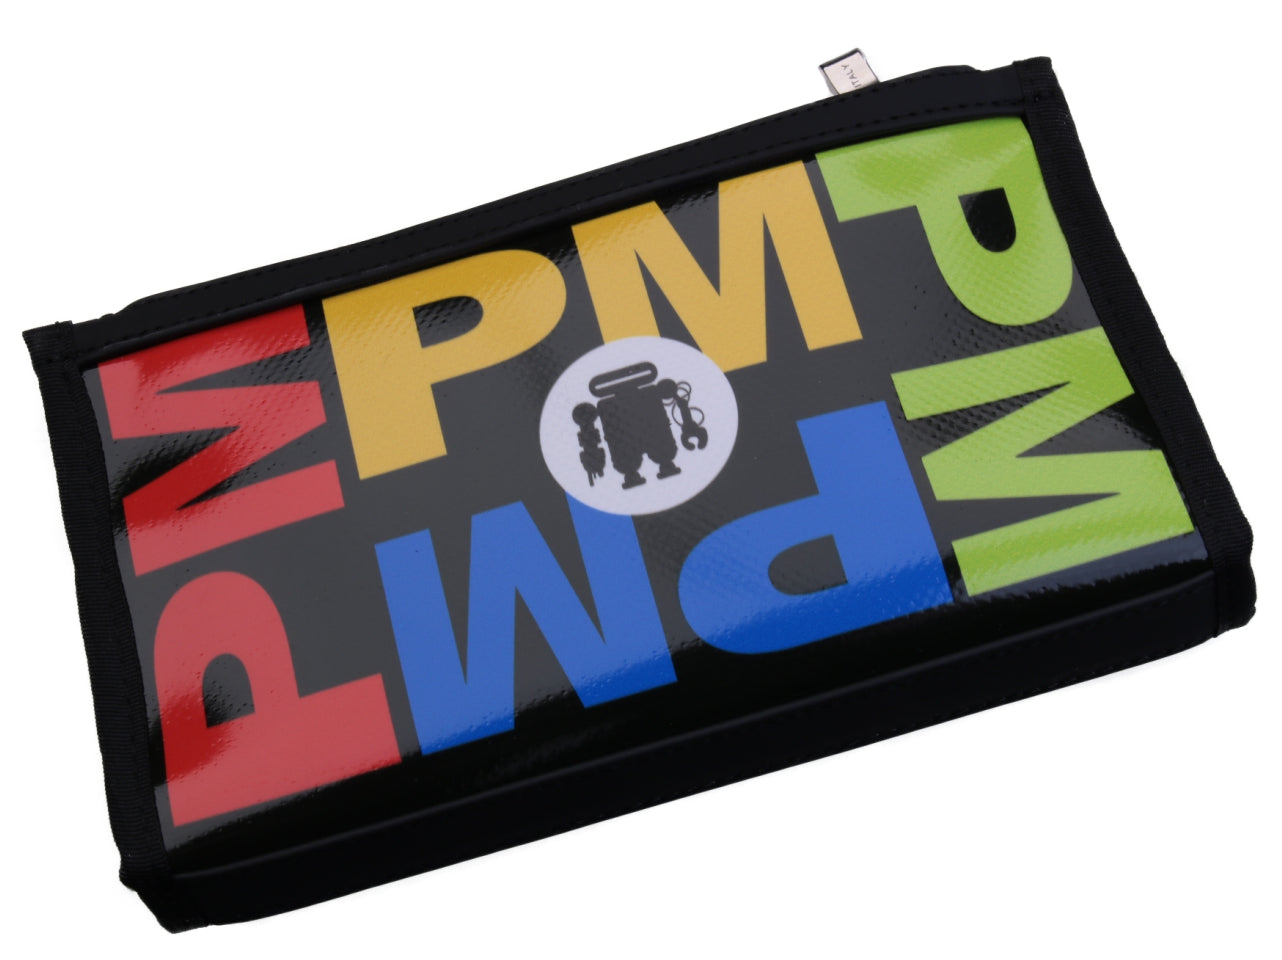 MULTICOLOUR LARGE WOMEN'S WALLET. MODEL PIT MADE OF LORRY TARPAULIN. - Limited Edition Paul Meccanico